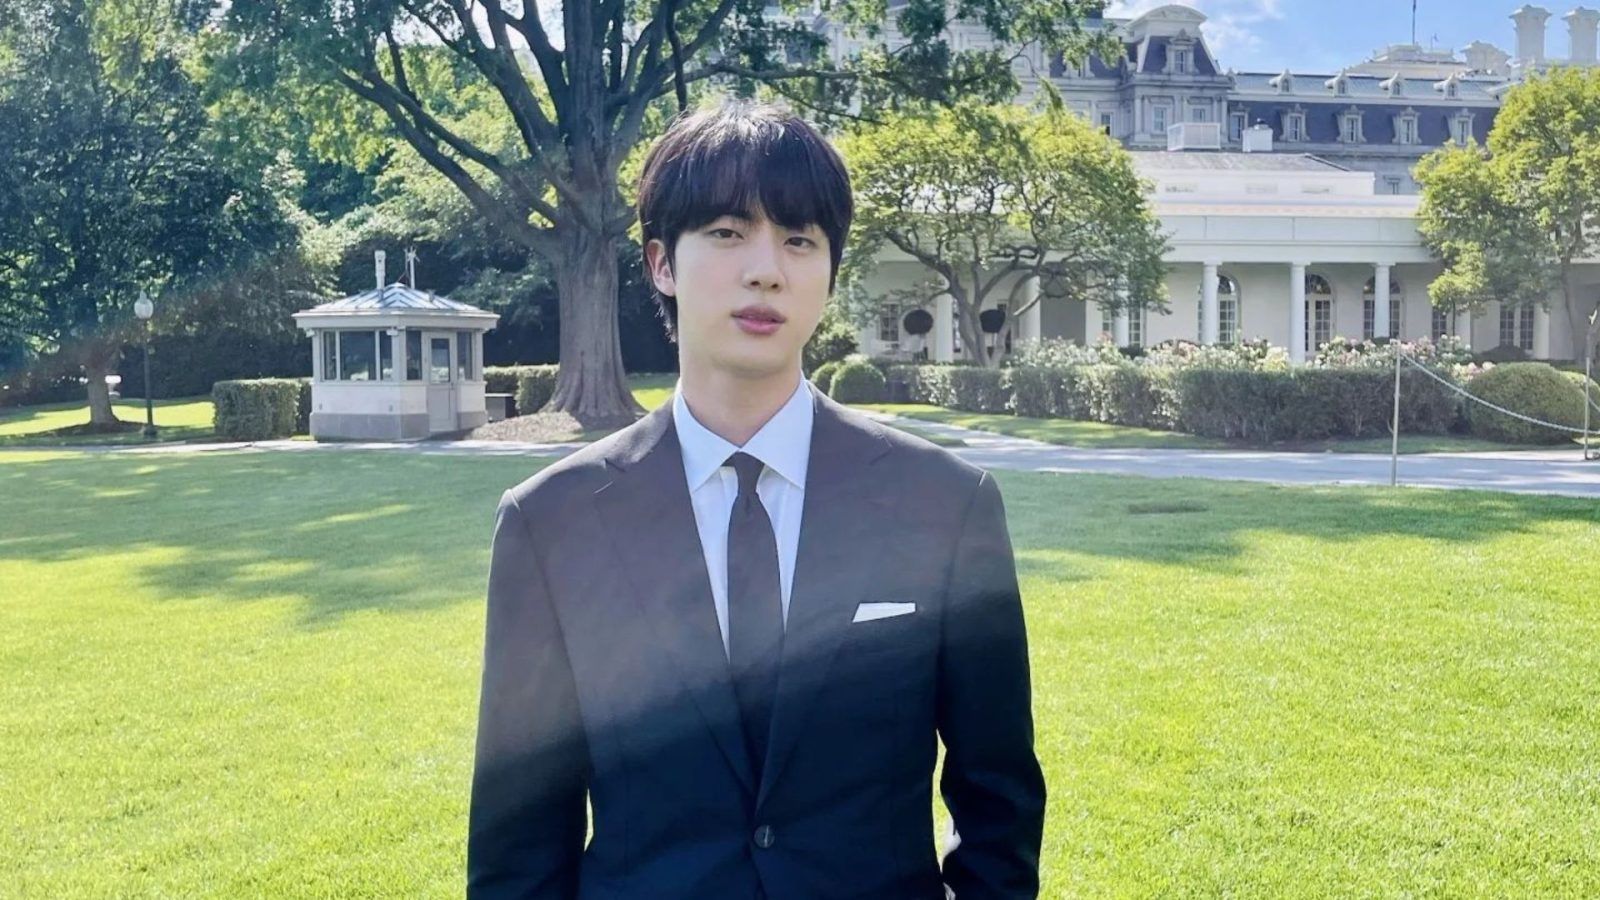 BTS' Jin set to begin his mandatory military service from 13 December